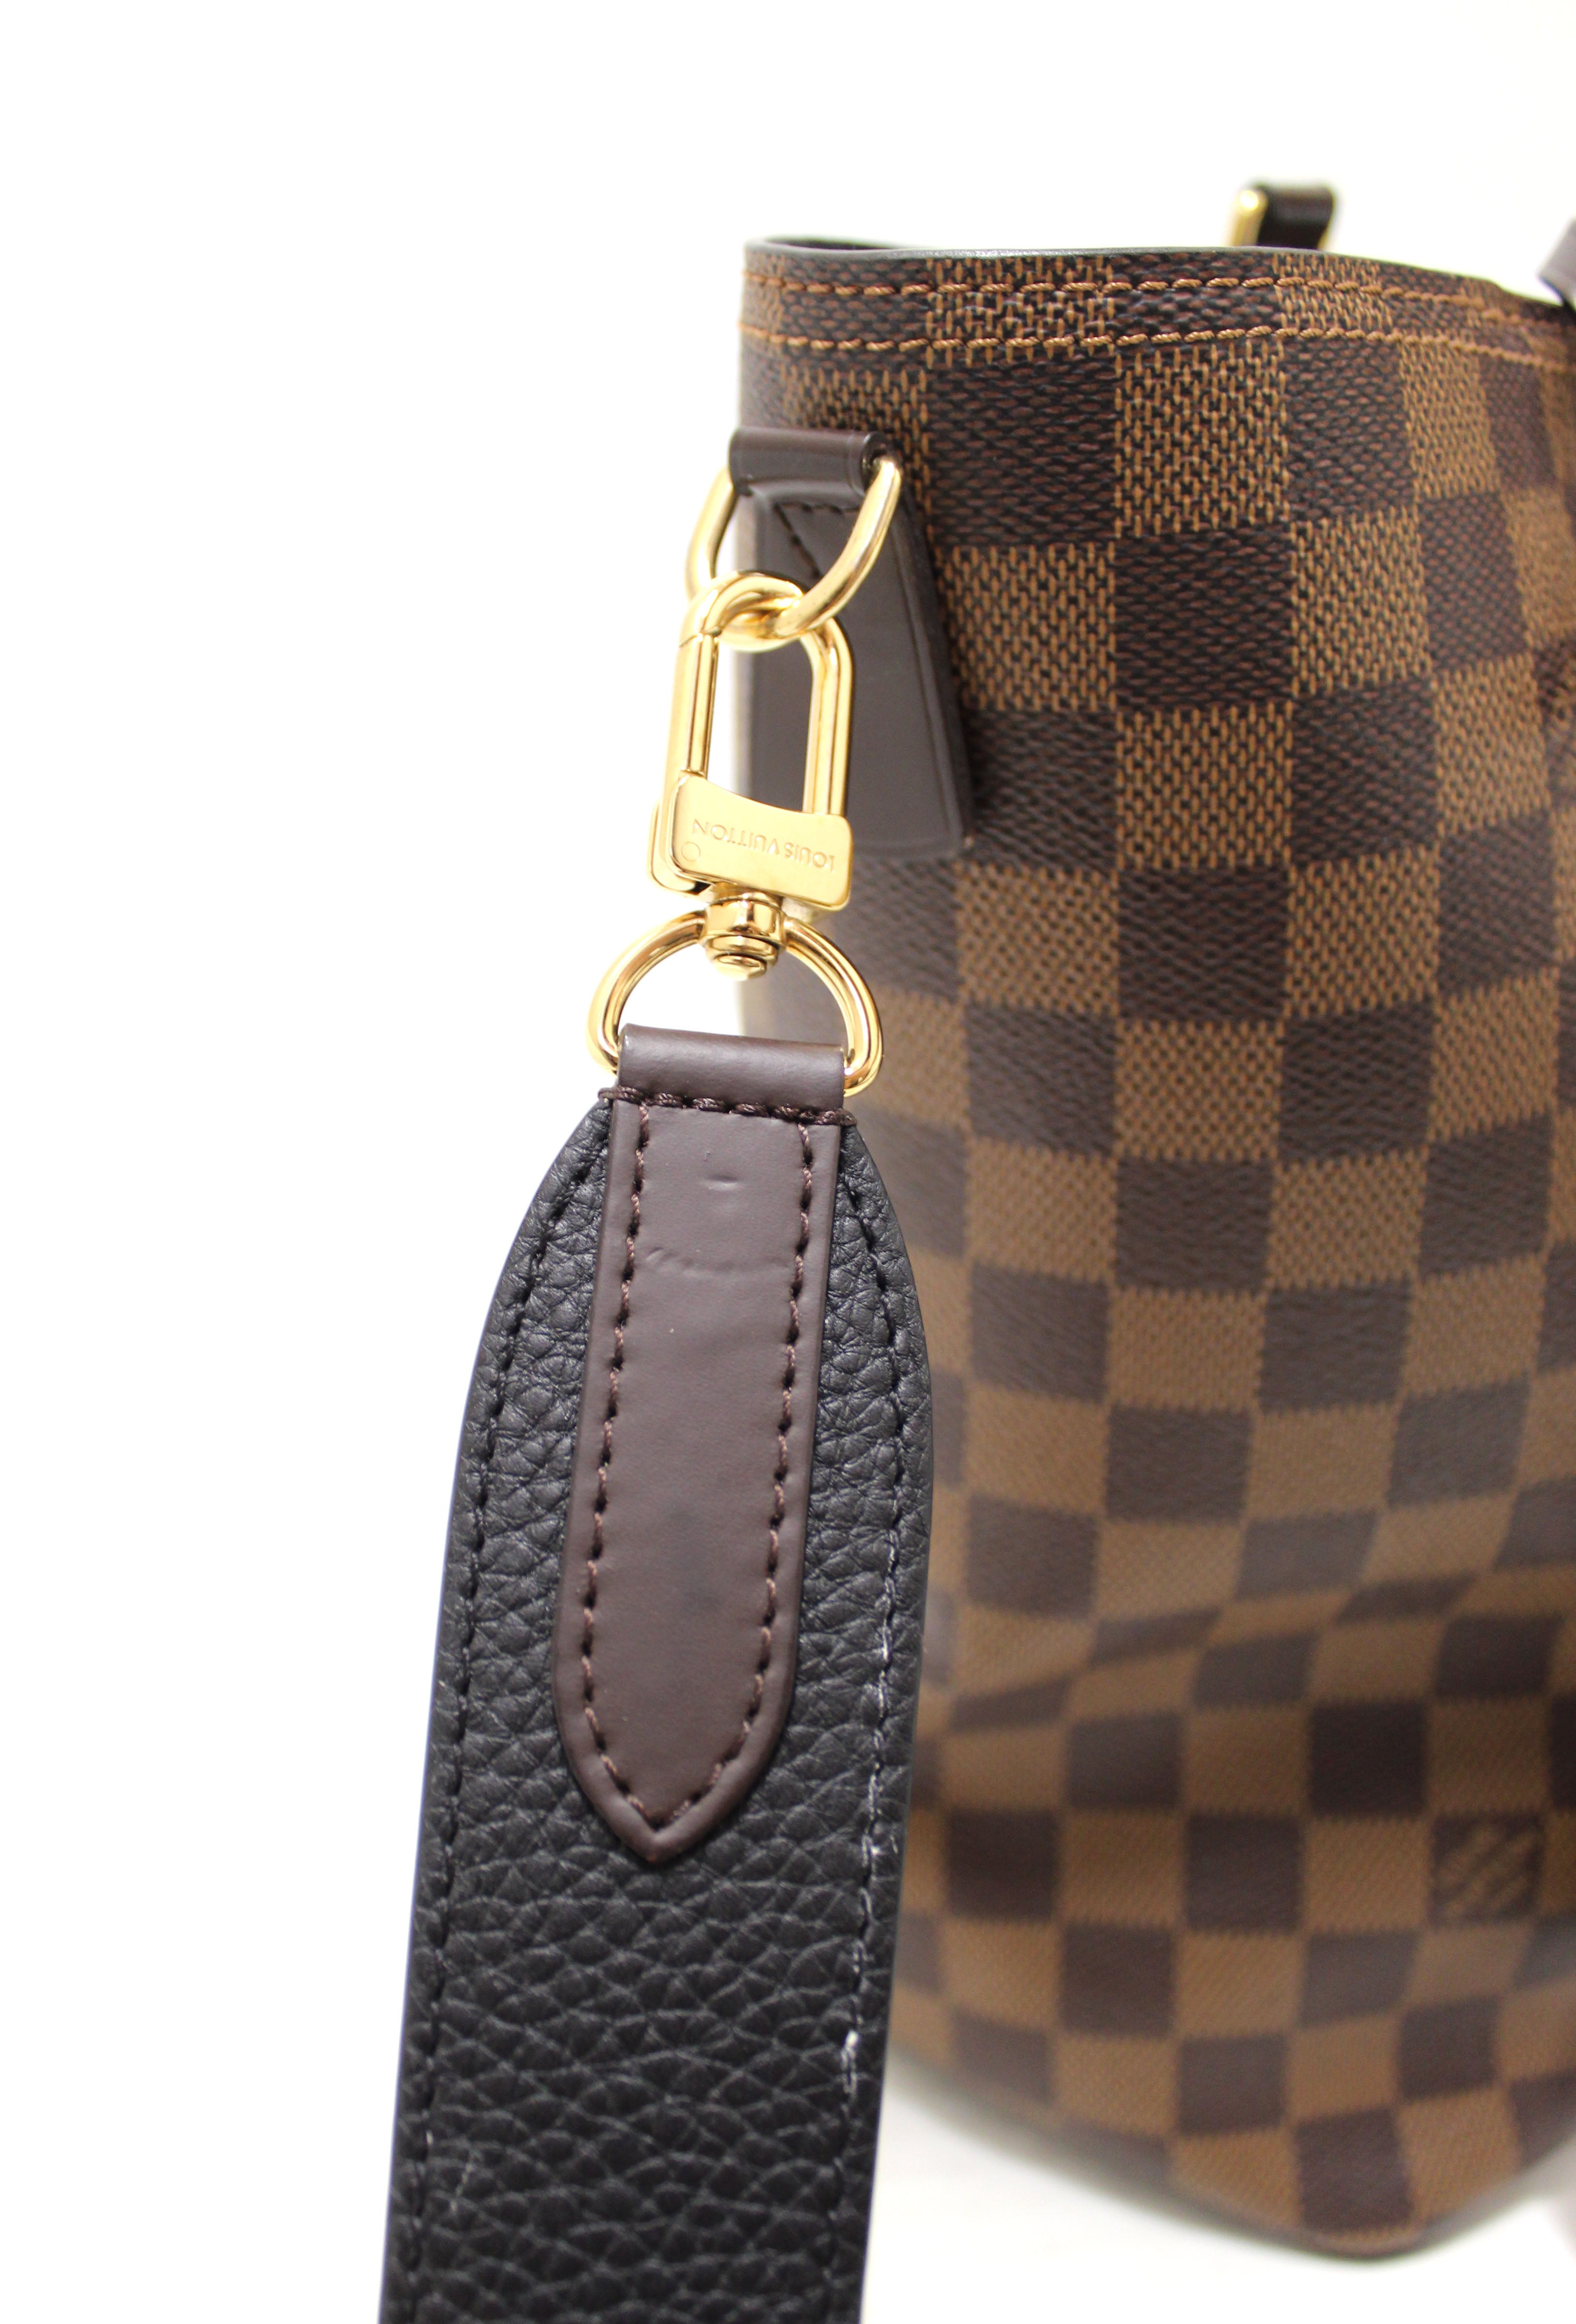 Authentic Louis Vuitton Damier Ebene with Black Leather Jersey